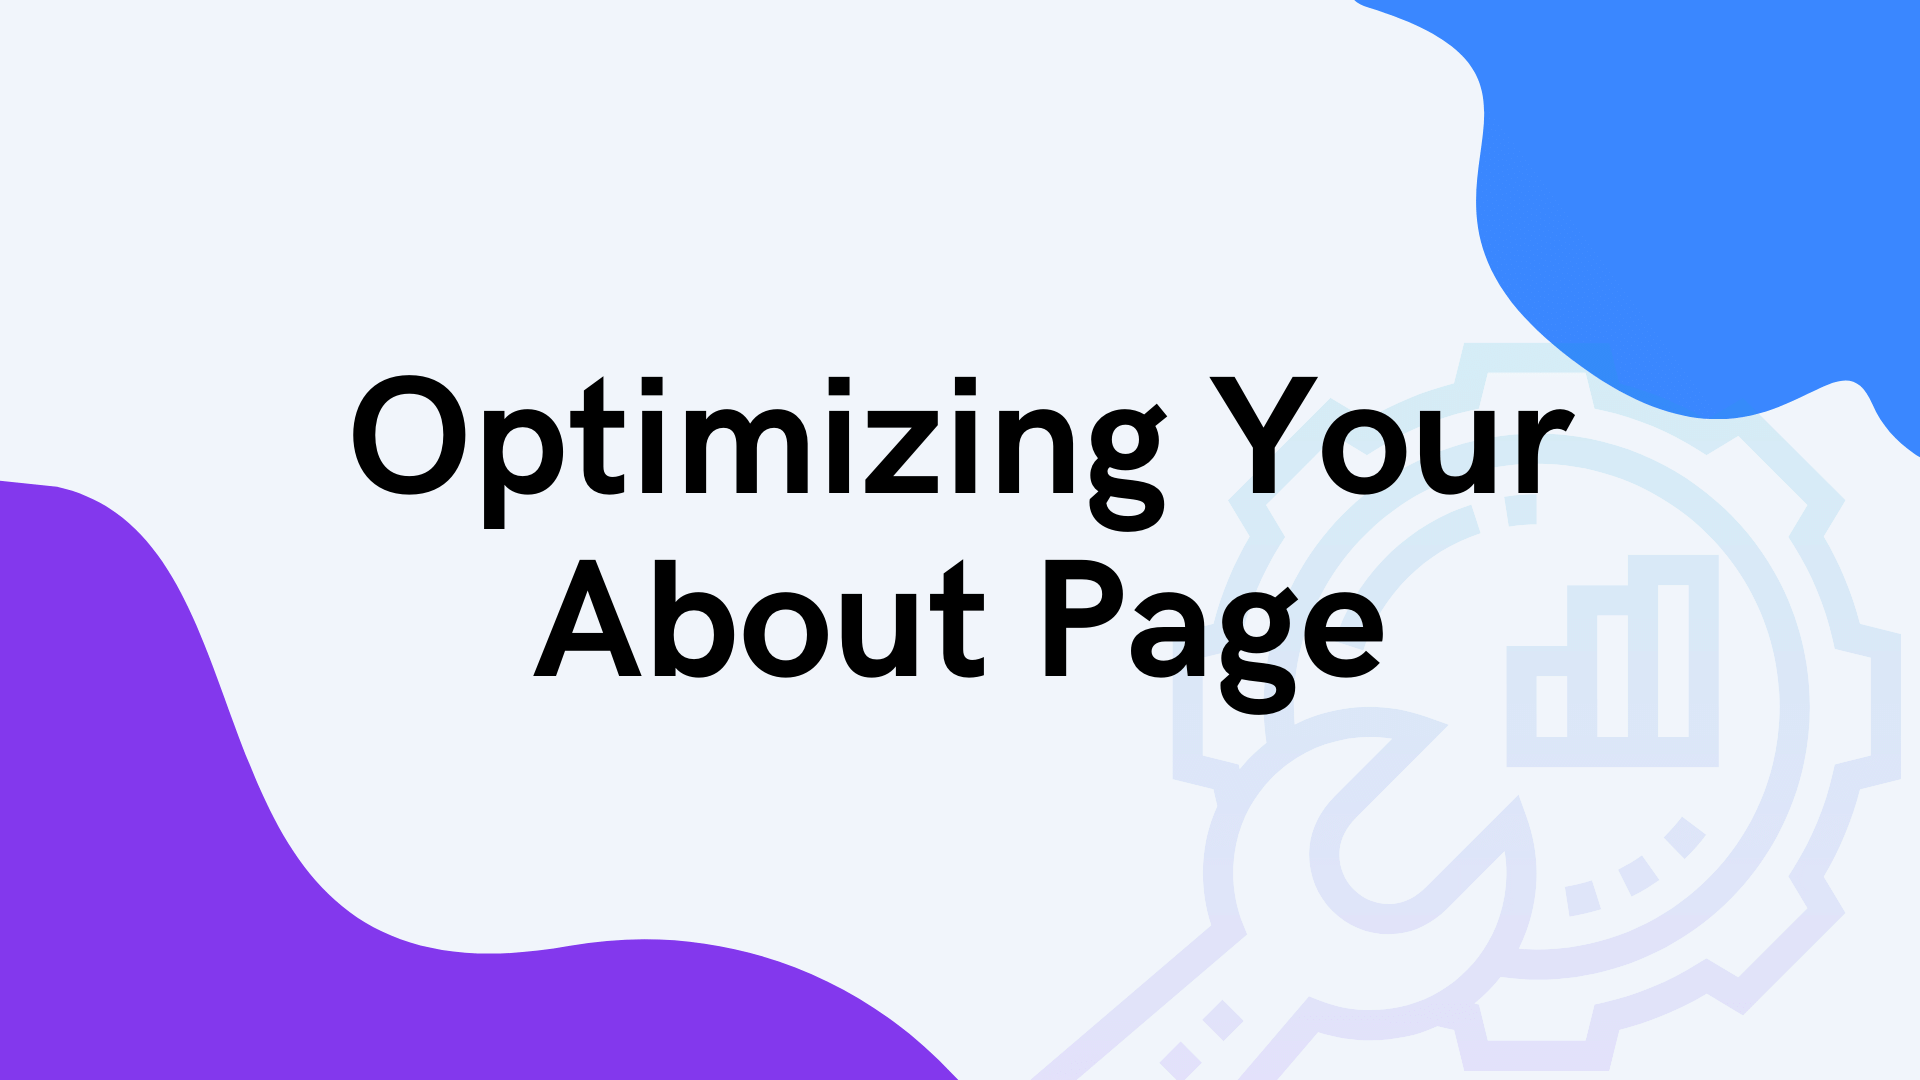 Optimizing Your About Page to Improve SEO